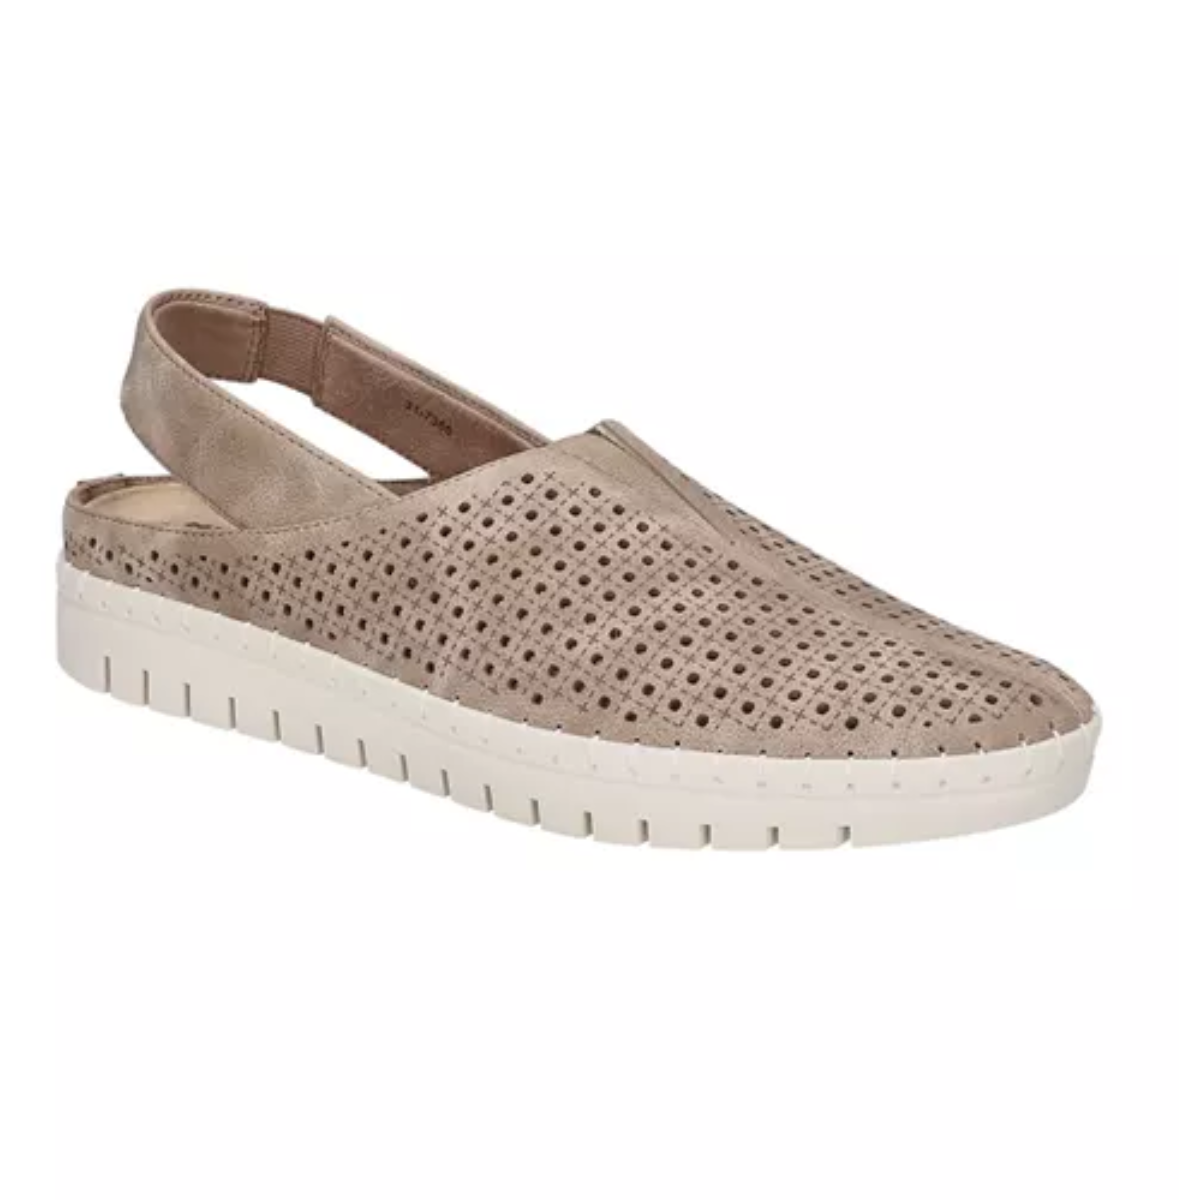 An EASY STREET So Fresh in Natural women's beige slip-on shoe with perforations, perfect for an athleisure outfit.